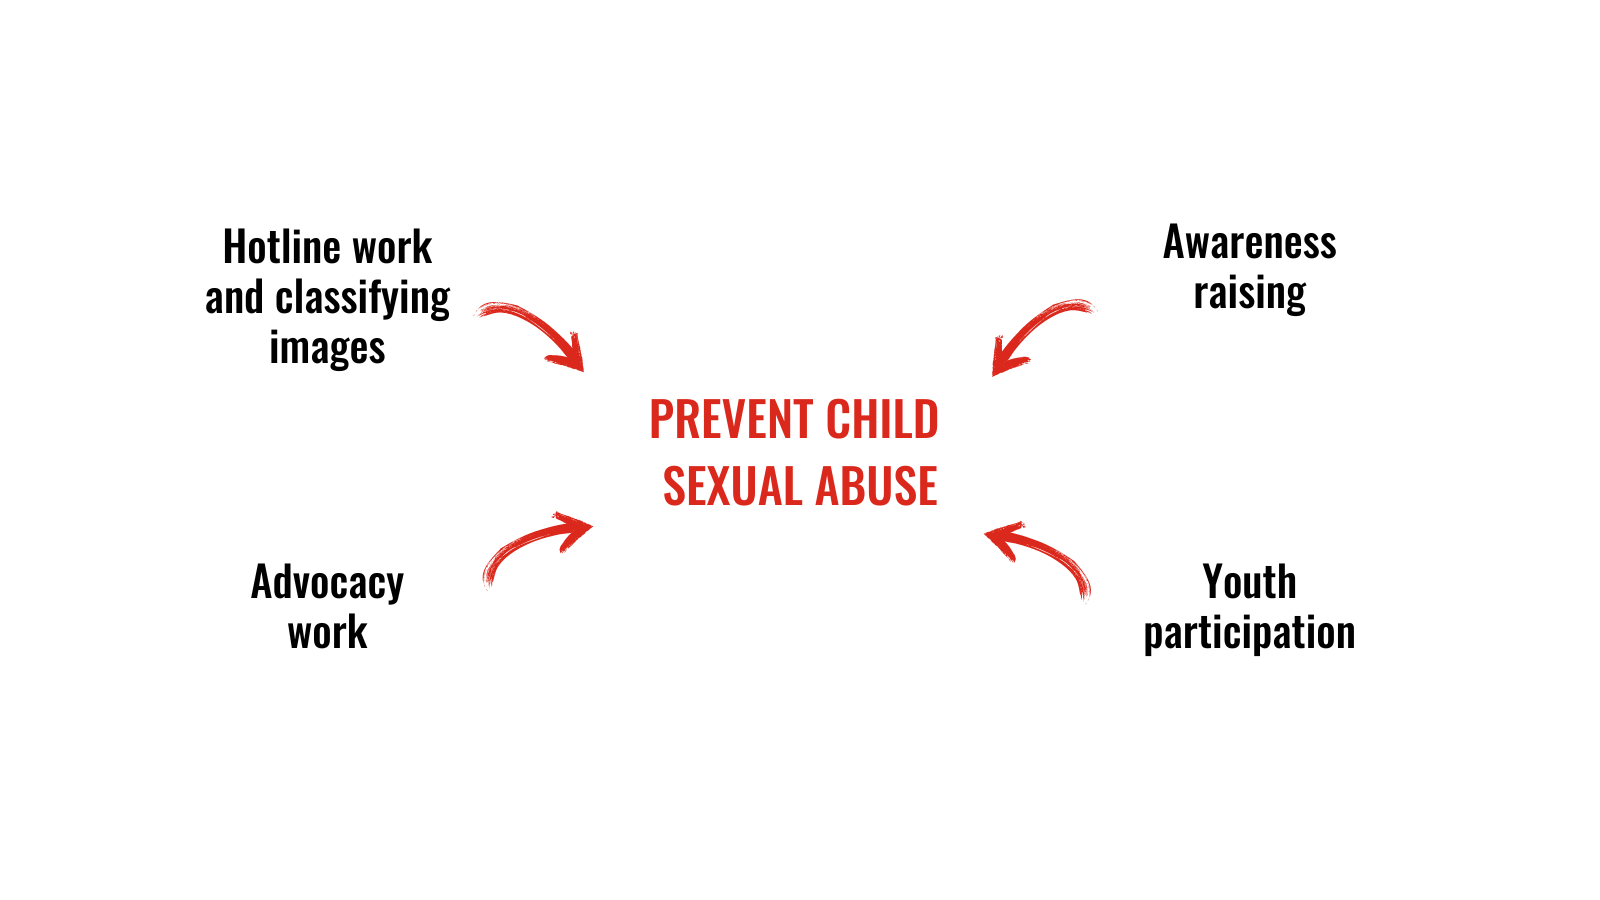 The functions of Nettivihje Hotline as a diagram. The diagram has four parts: 1. Hotline work and image-classifying work. 2. Awareness raising. 3. Advocacy work. 4. Youth participation. In the diagram, the goal is: prevent child sexual abuse.